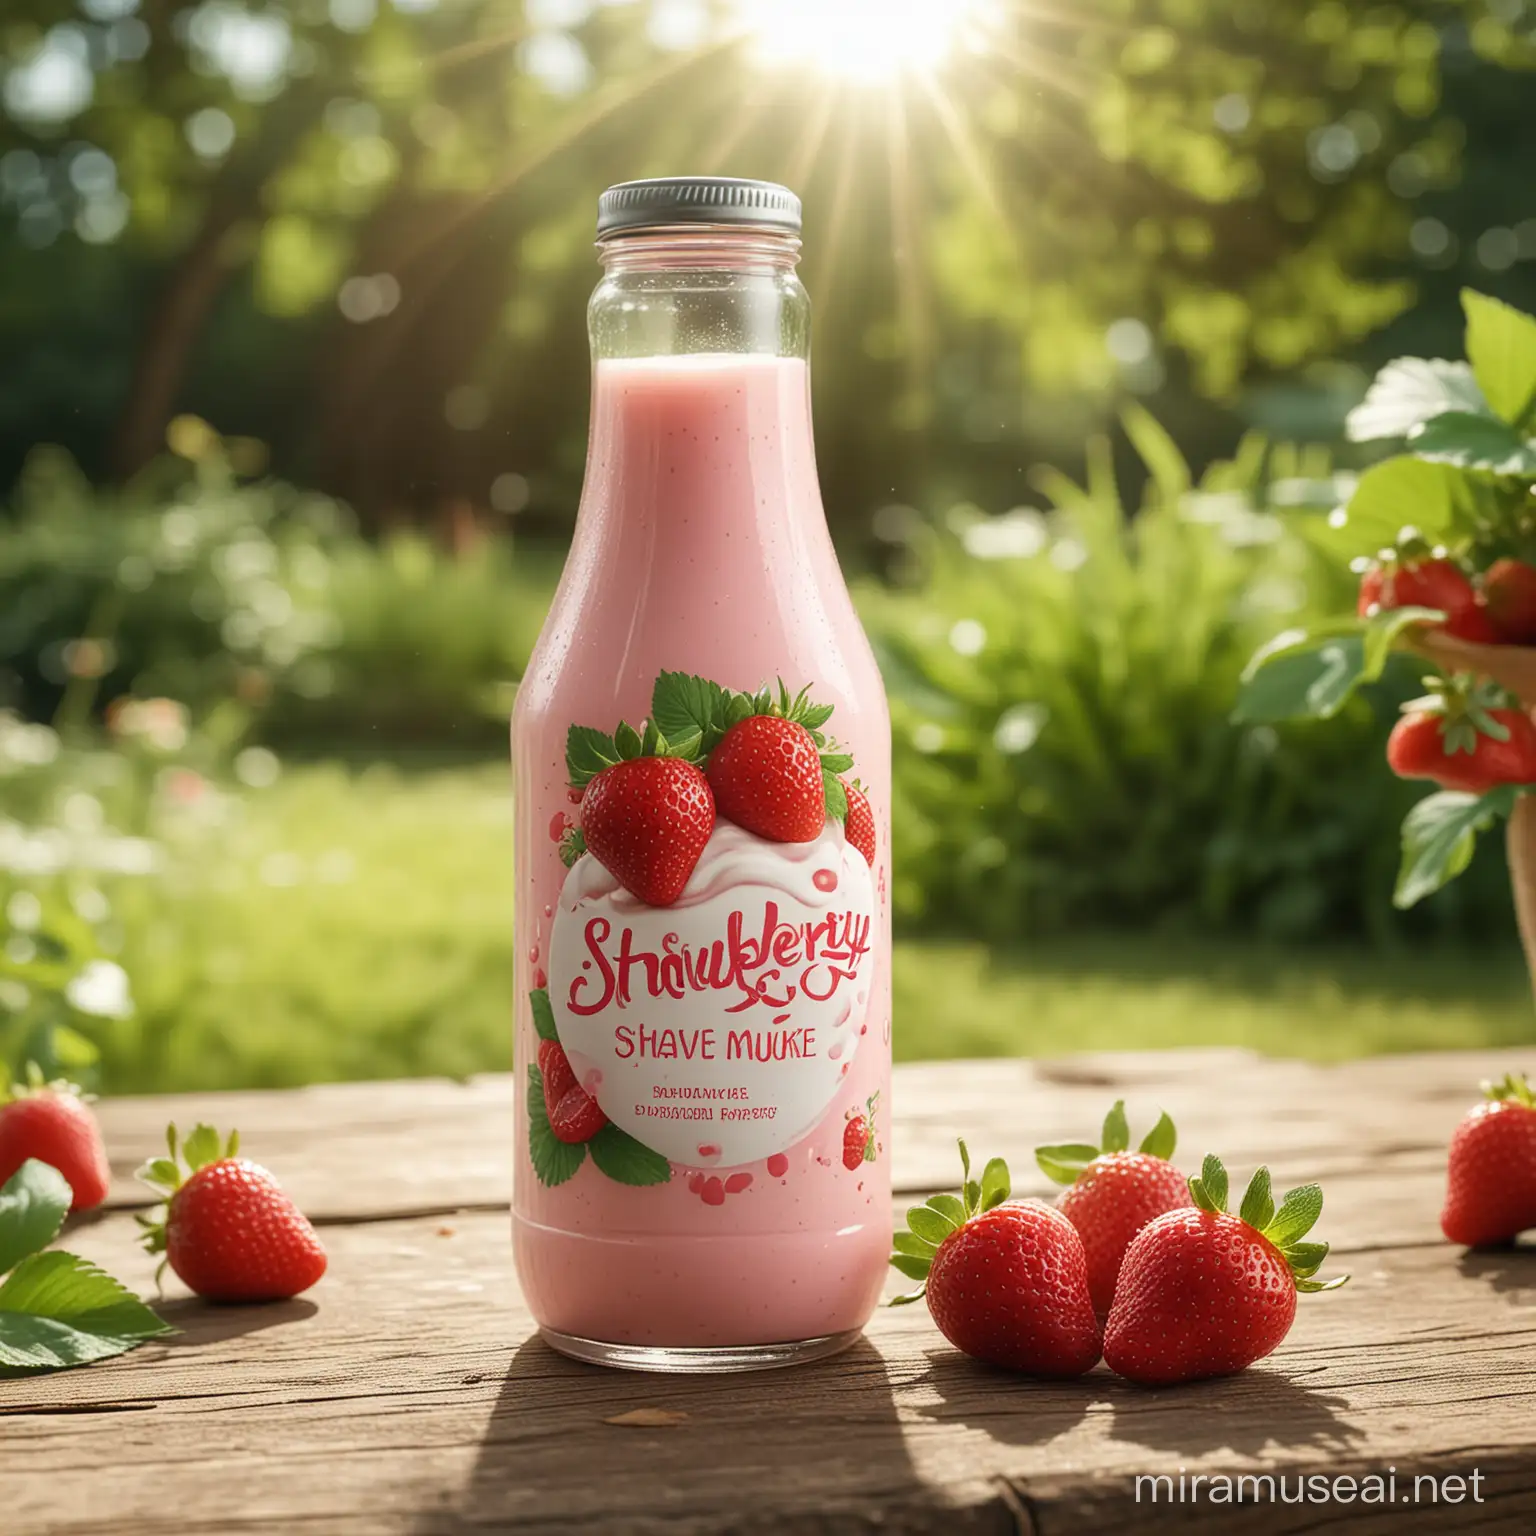 Delicious Strawberry Shake Milk Bottle with Splashing Milk and Fresh Strawberries on Wooden Table